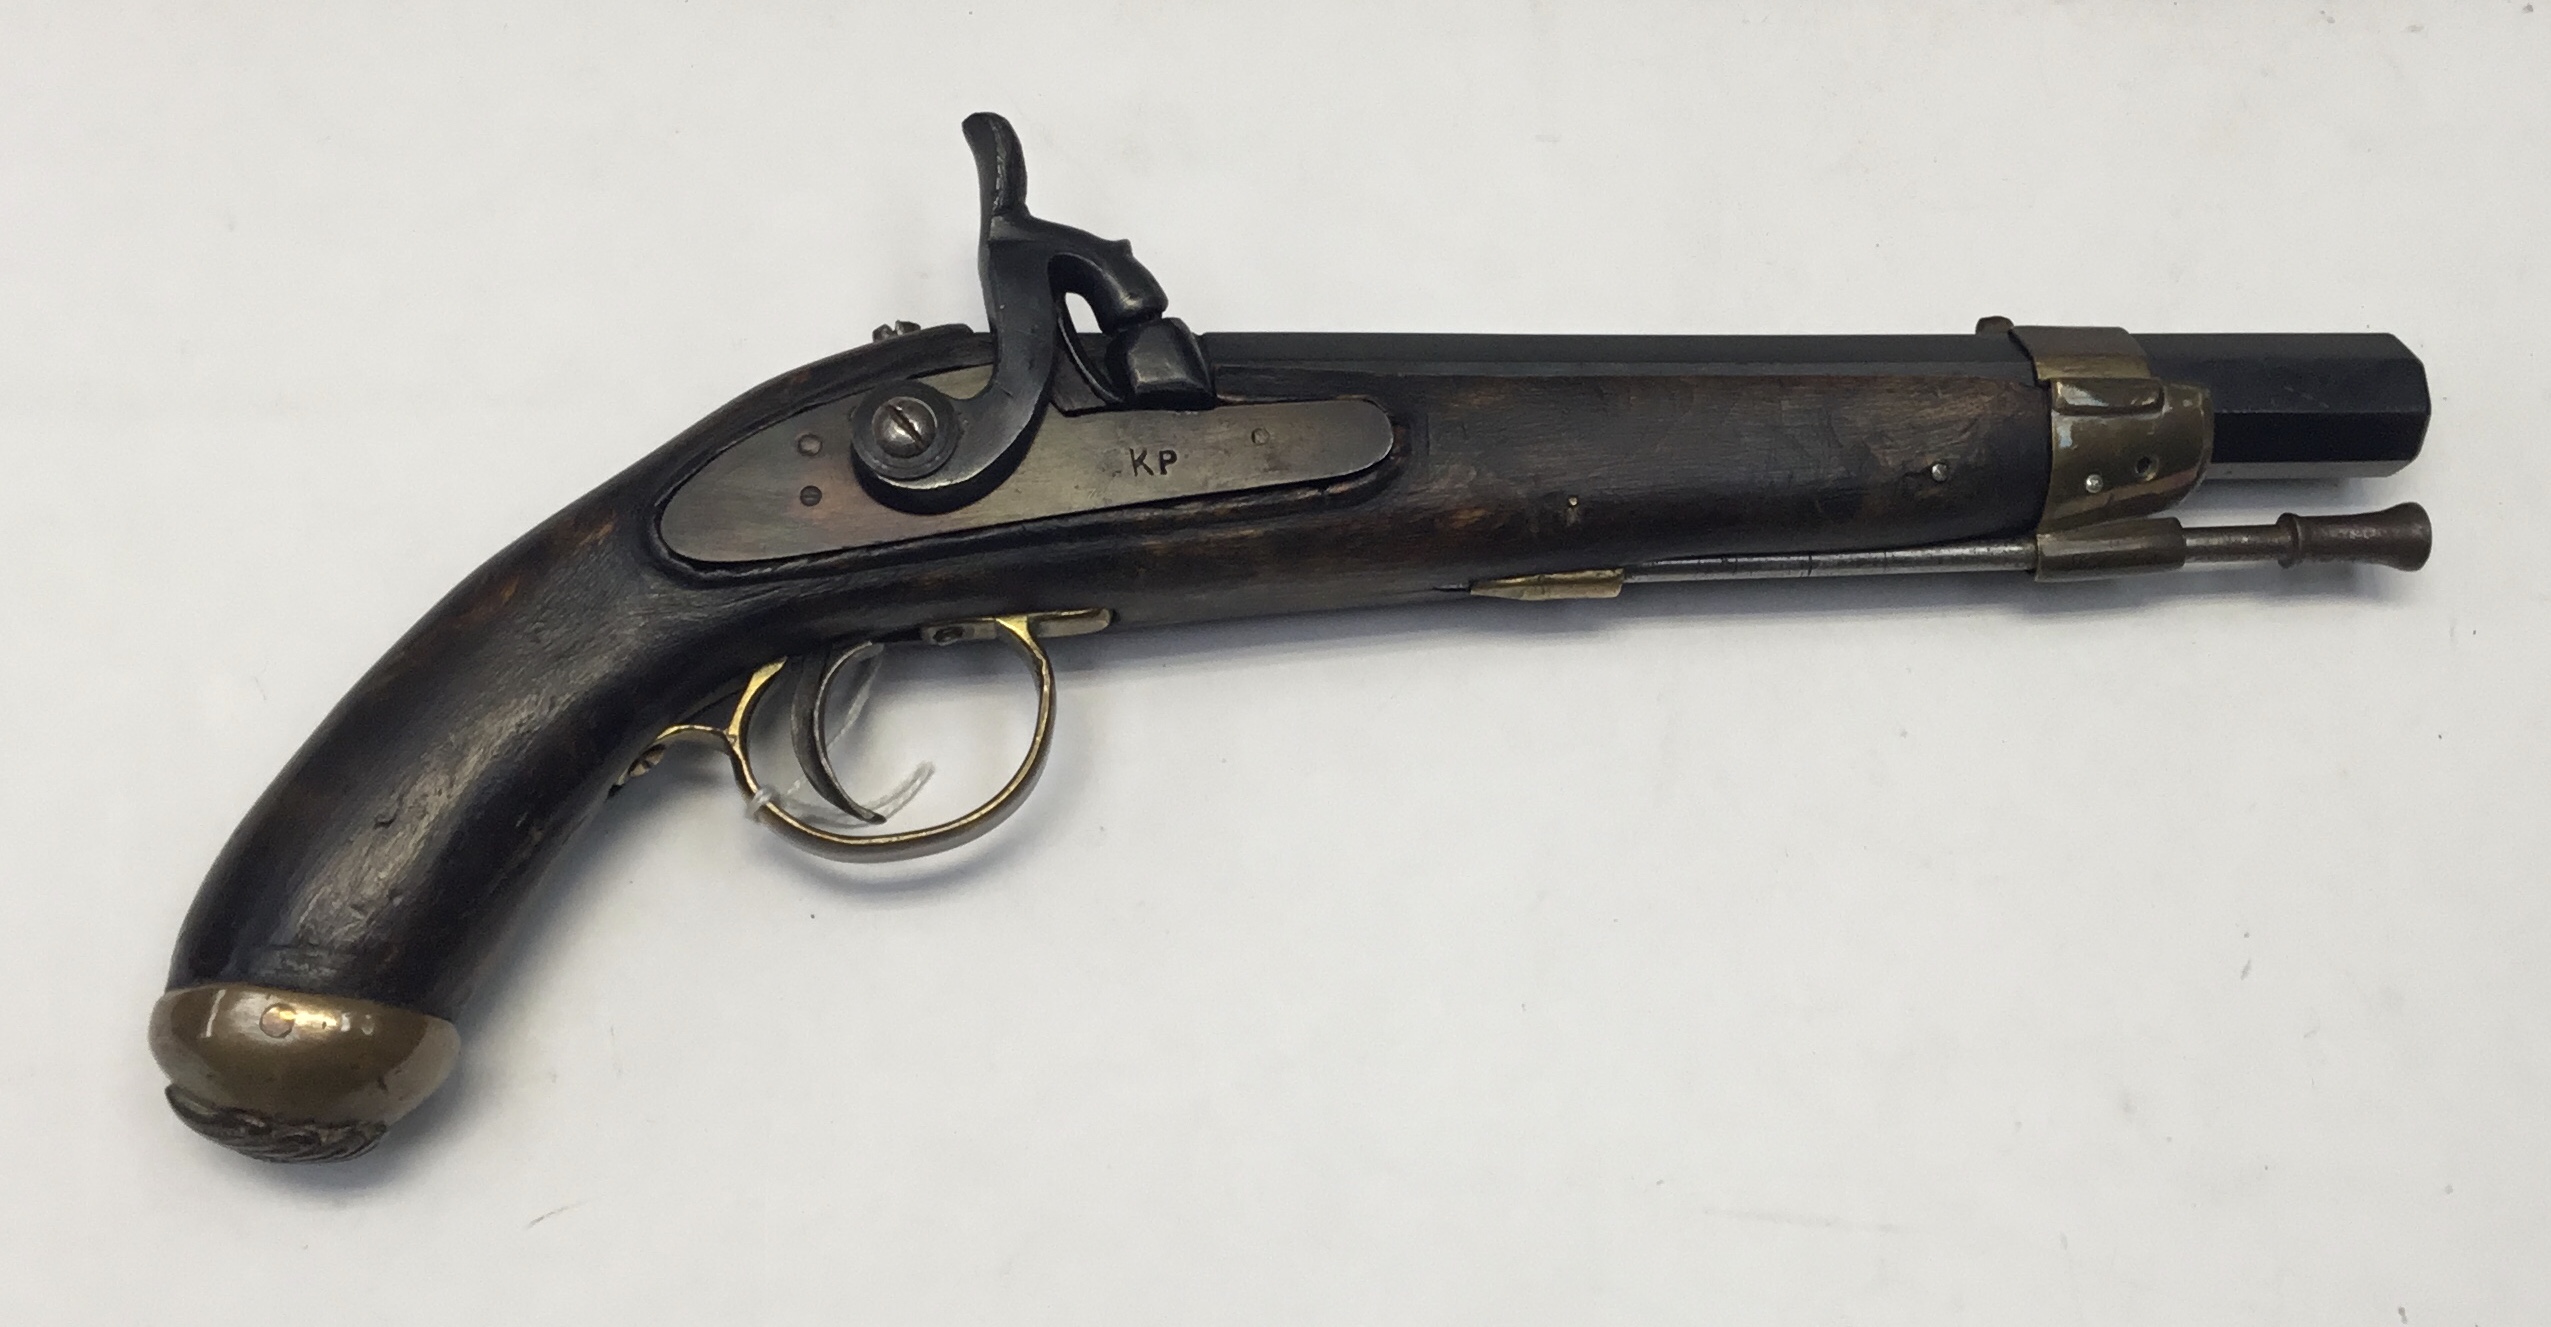 A Mid 19th century style single barrel percussion pistol. Overall length 14” with 9” blued octagonal